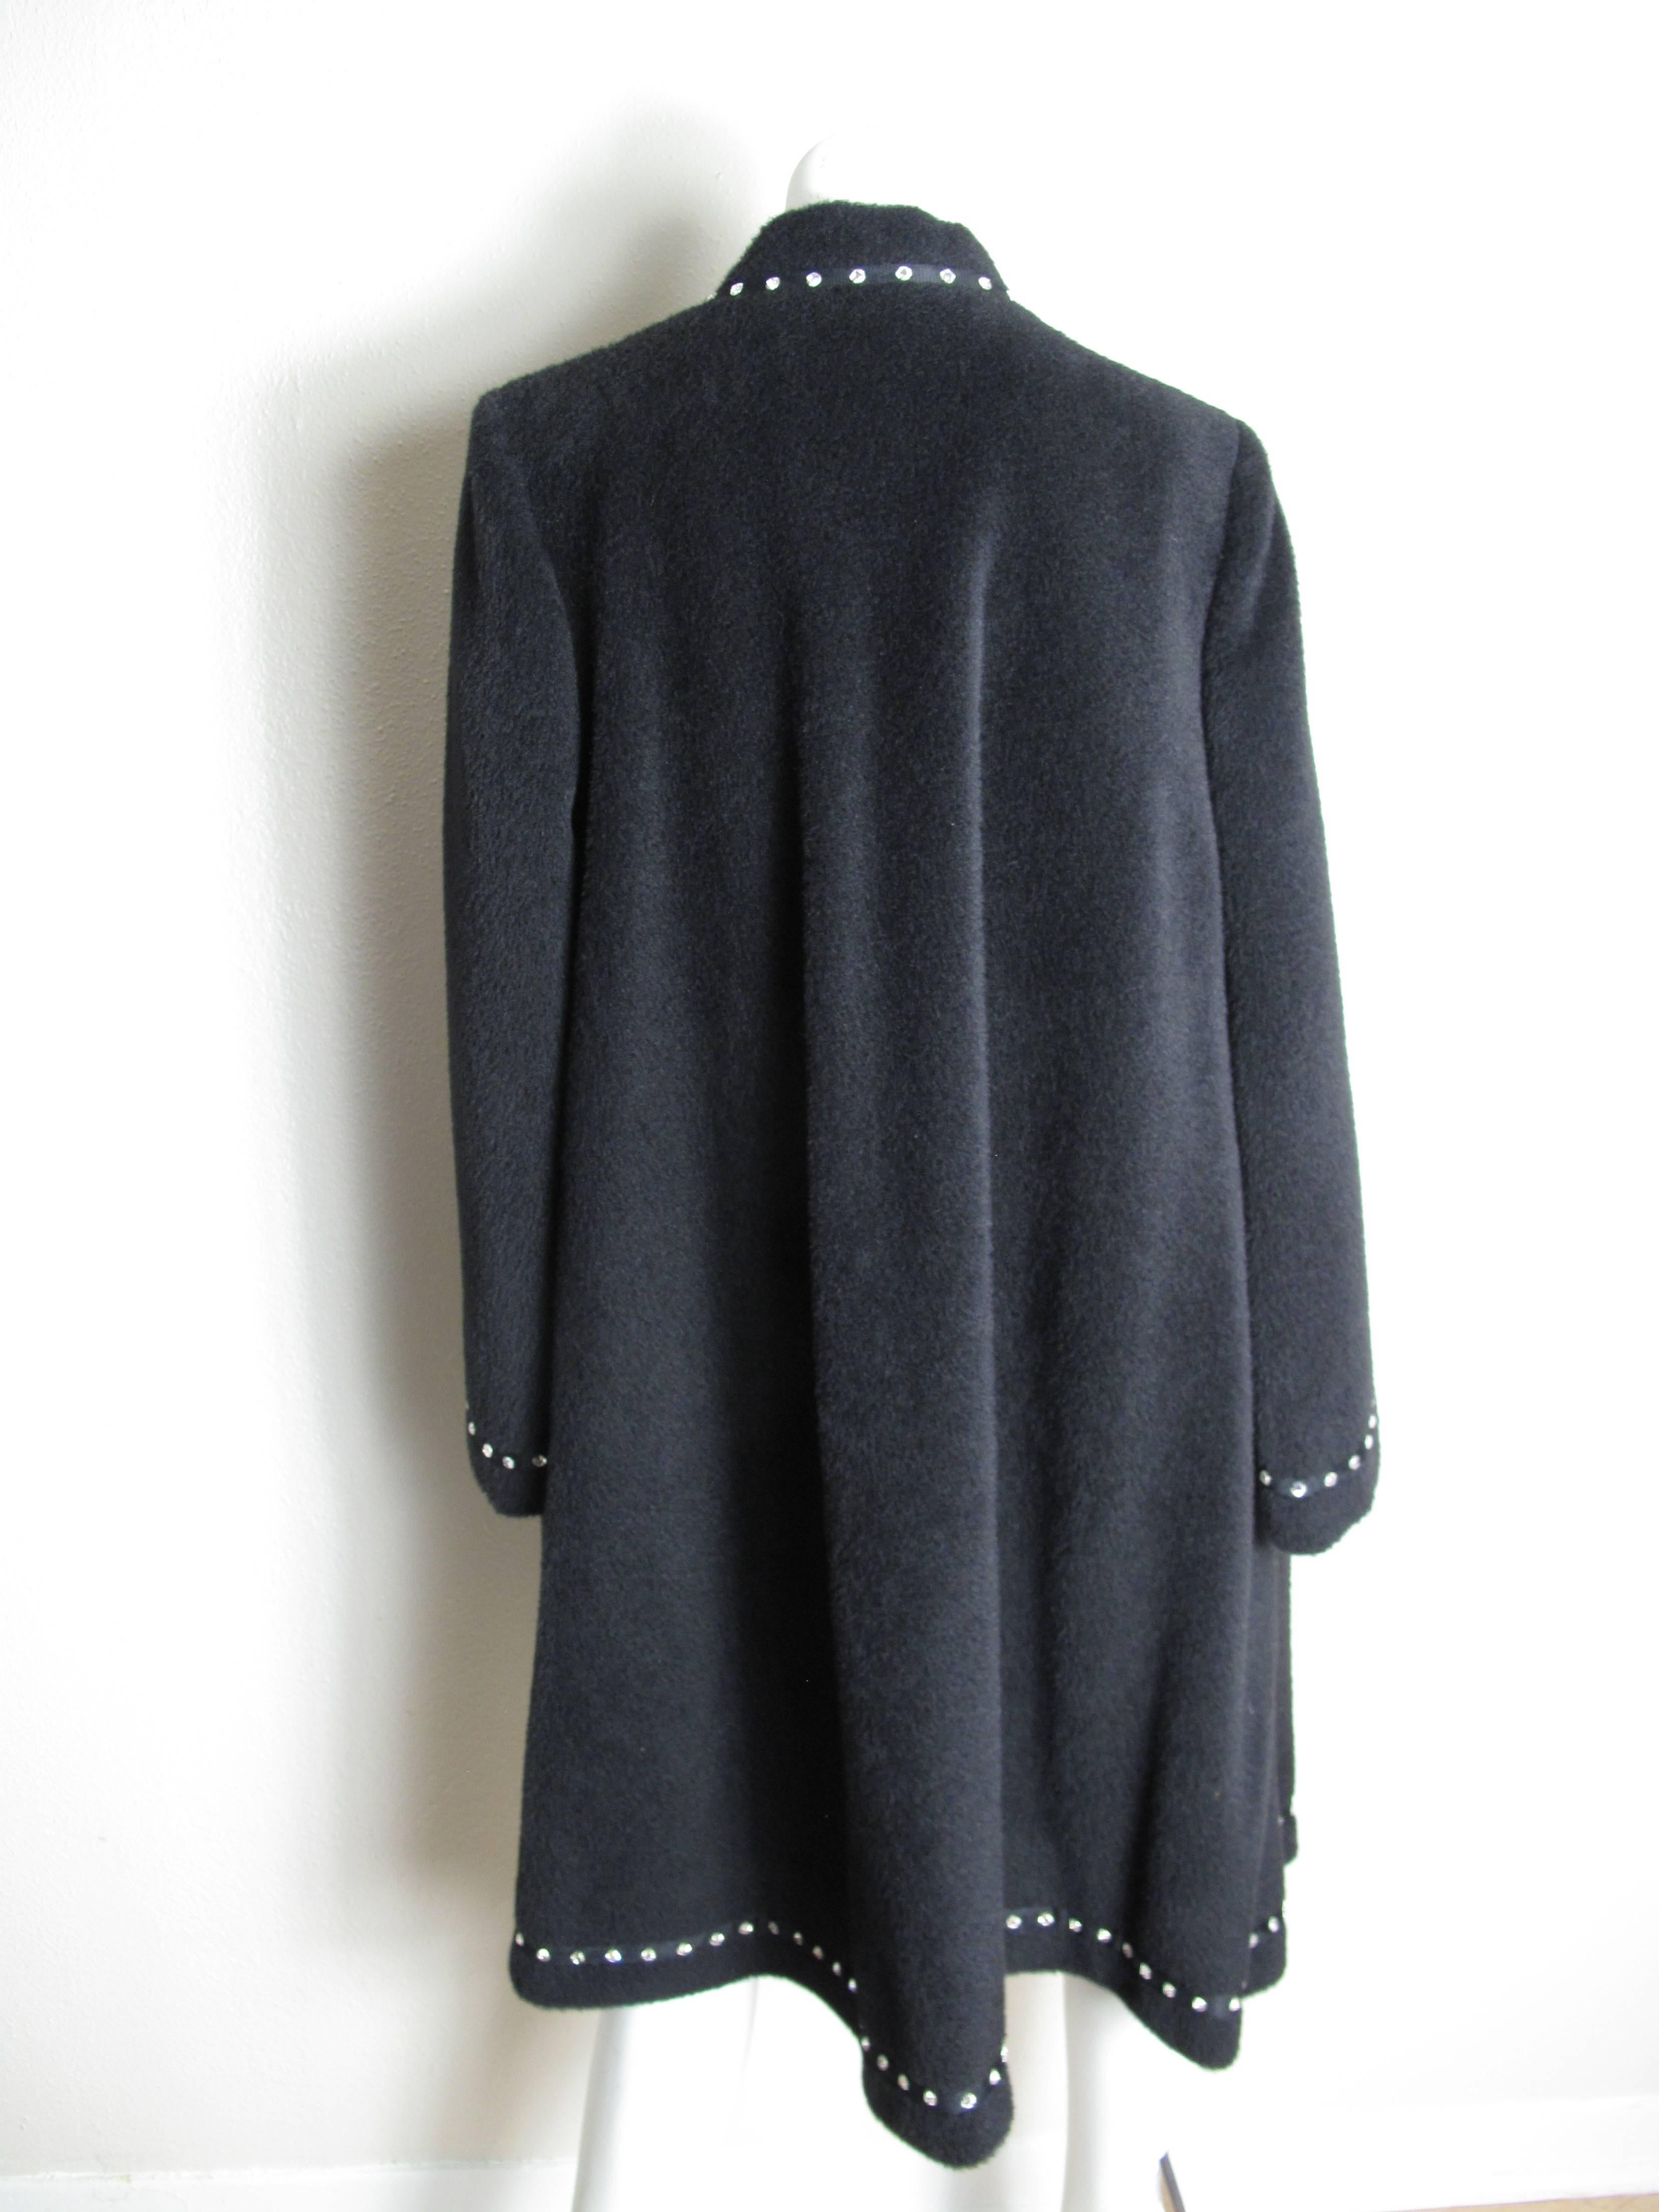 Pauline Trigere black wool coat with rhinestone trim.  Condition: Excellent. Size L
sleeve: 25", 17.5" shoulder.

We accept returns for refund, please see our terms.  We offer free ground shipping within the US.  Please let us know if